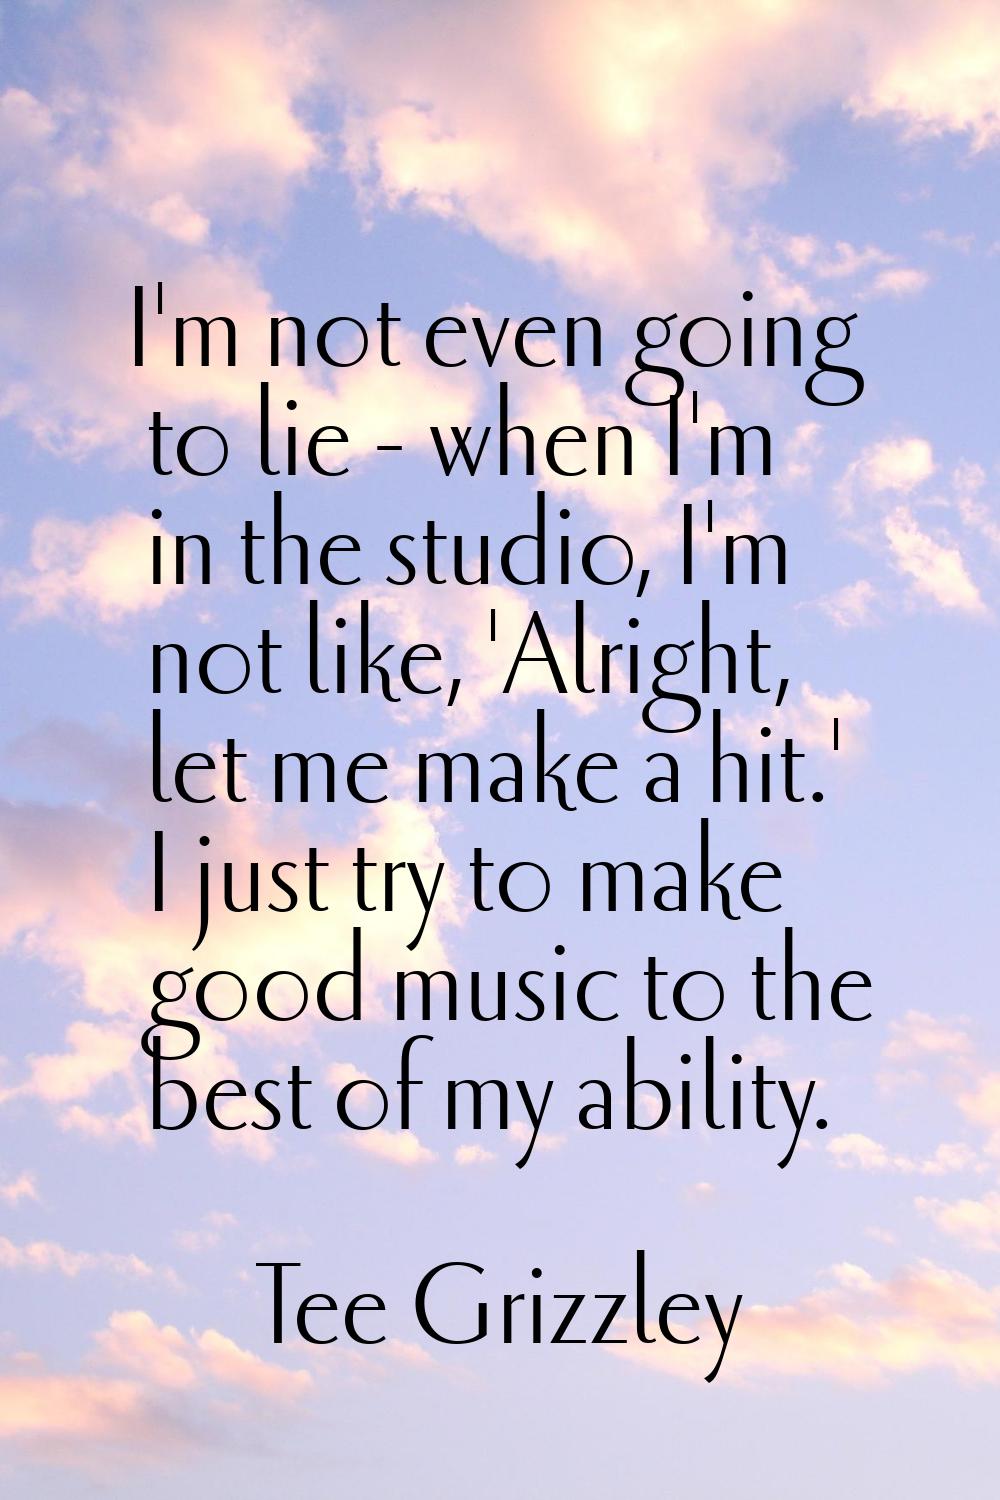 I'm not even going to lie - when I'm in the studio, I'm not like, 'Alright, let me make a hit.' I j